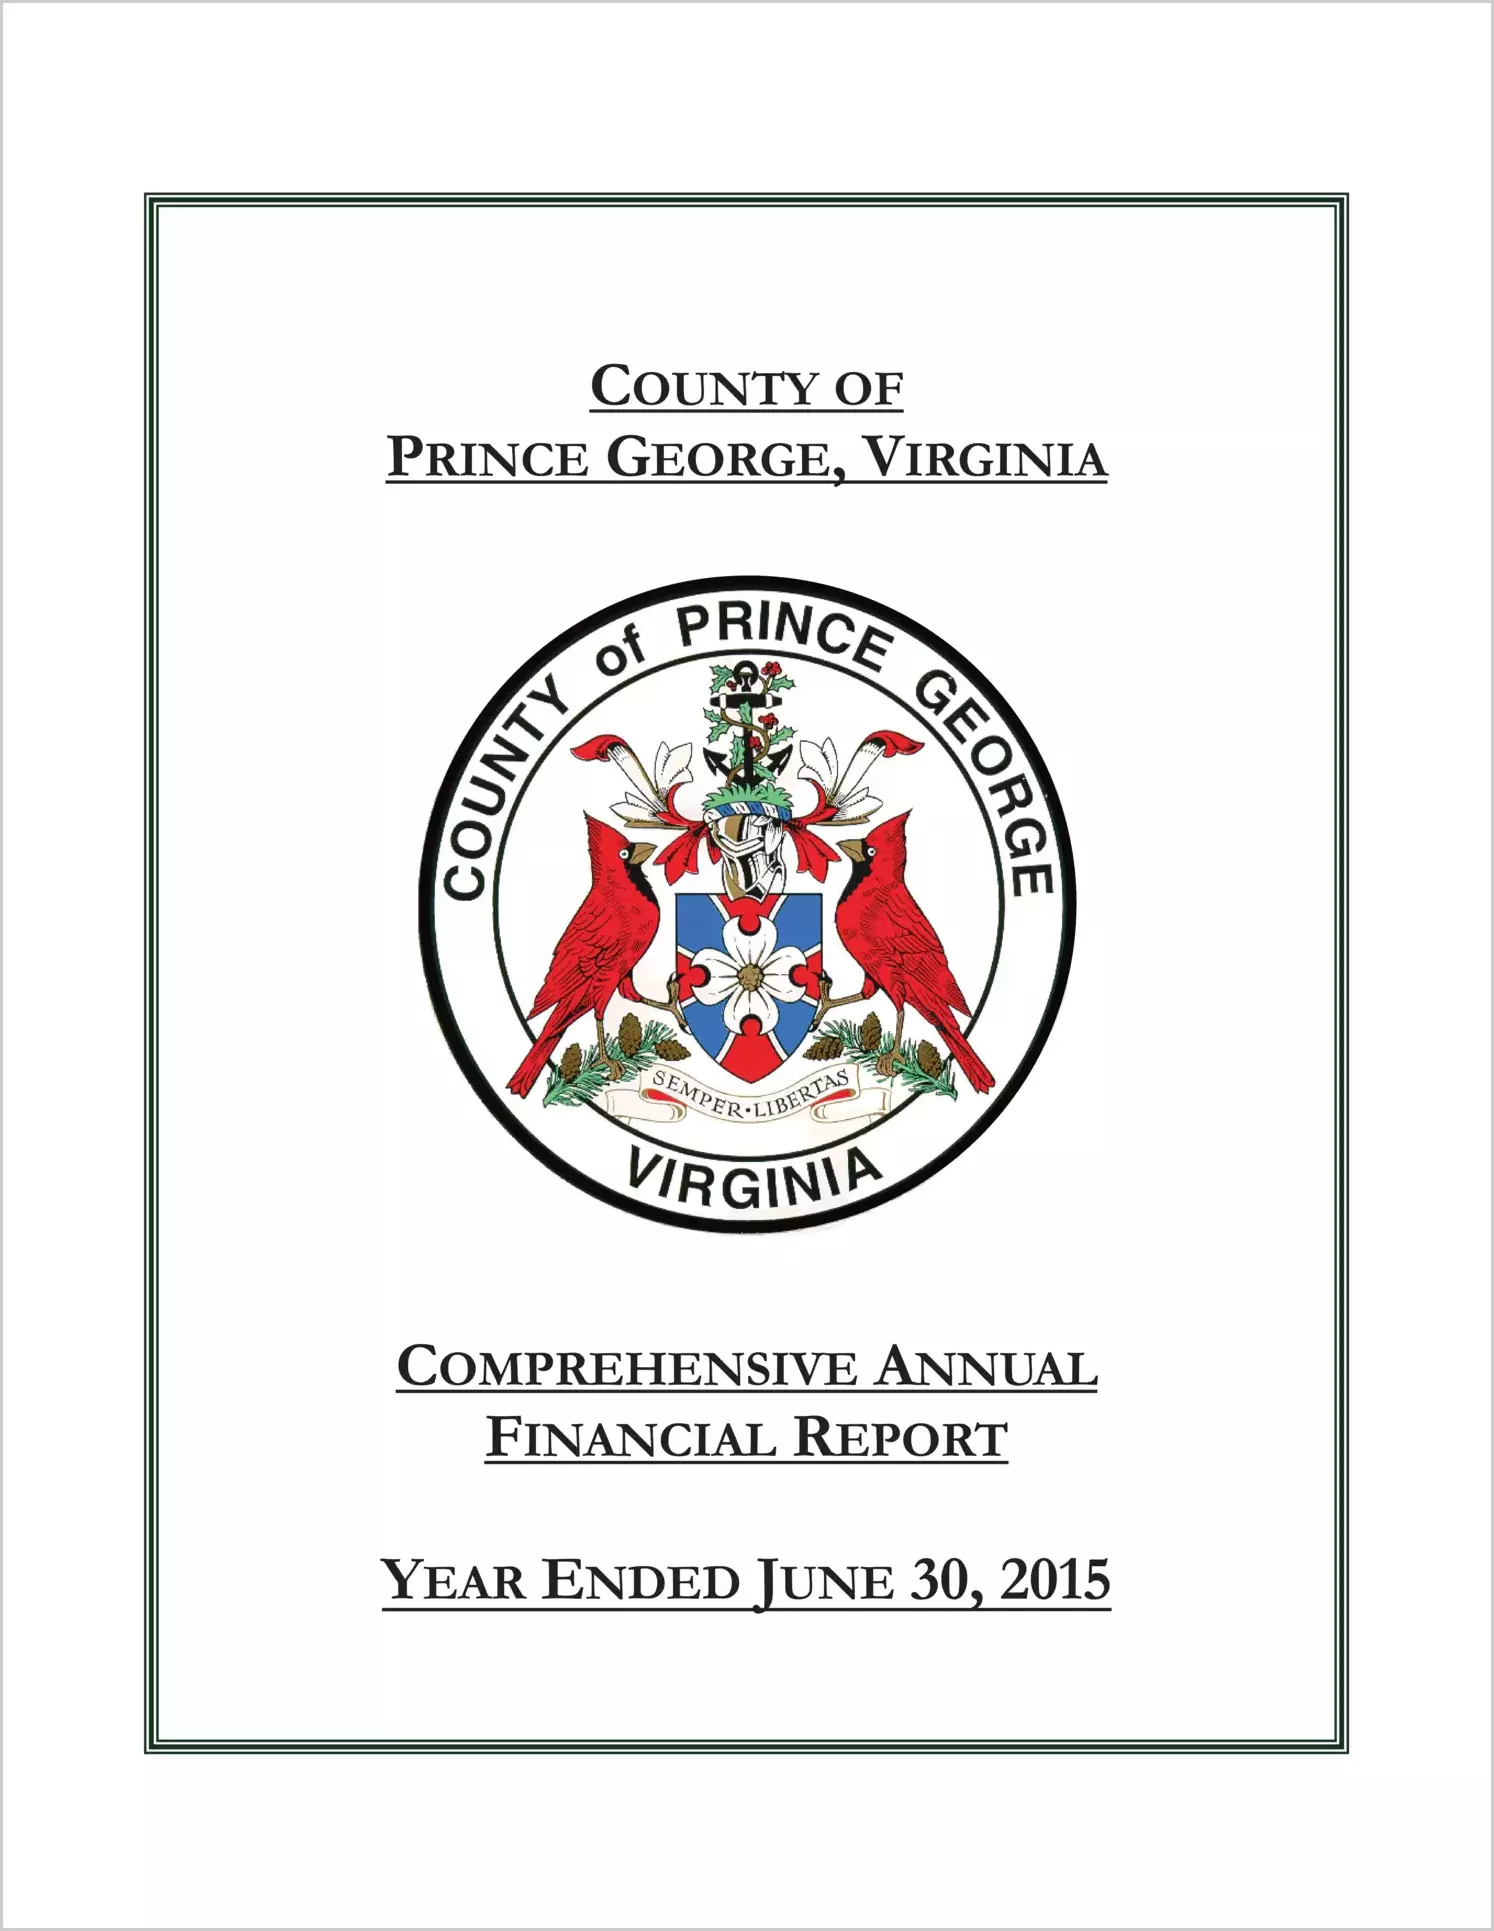 2015 Annual Financial Report for County of Prince George